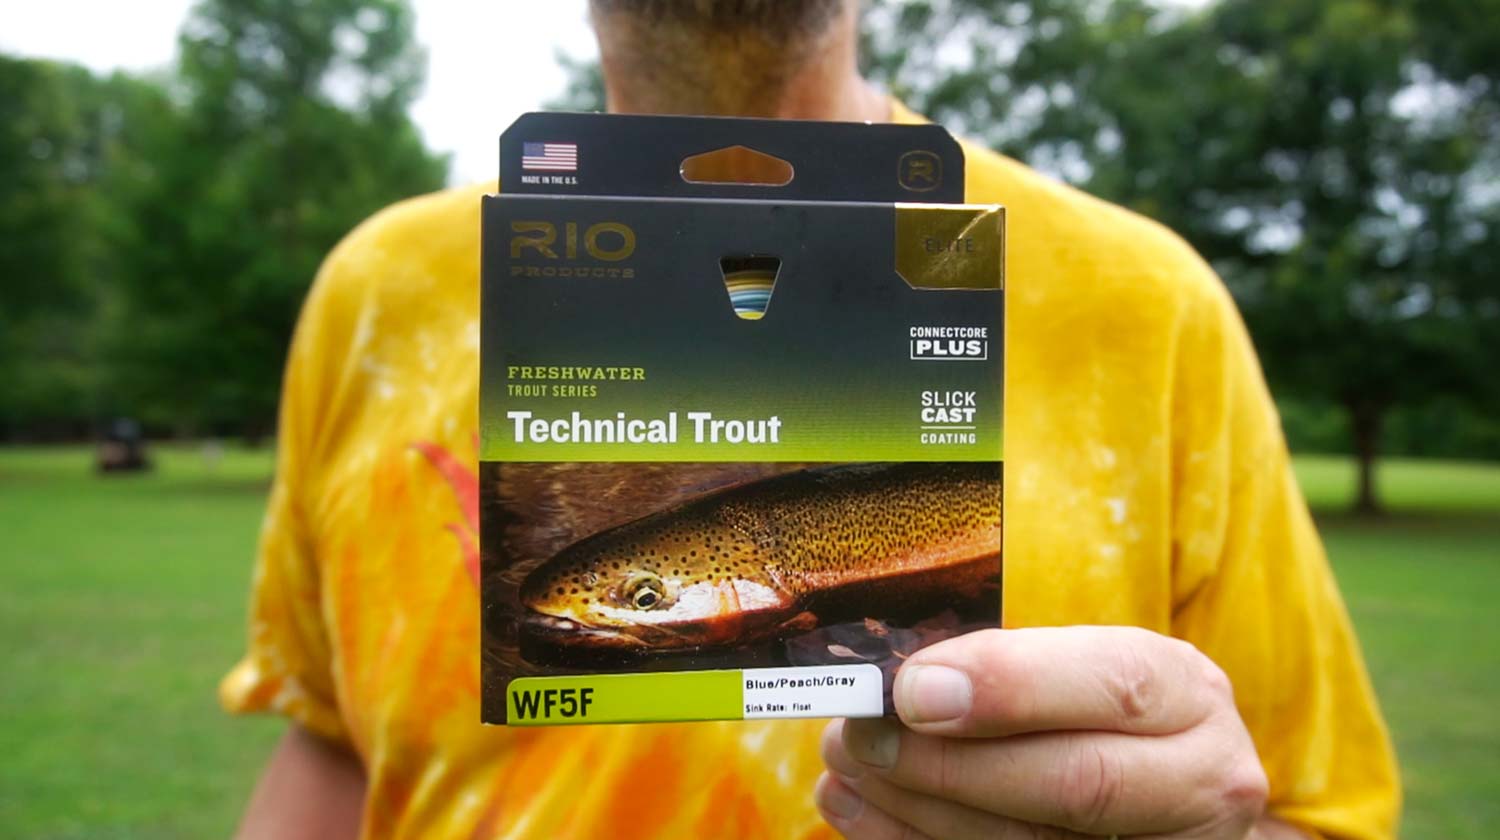 RIO Slick Cast Coating and Technical Trout Fly Line: Video - Fly Fishing, Gink and Gasoline, How to Fly Fish, Trout Fishing, Fly Tying